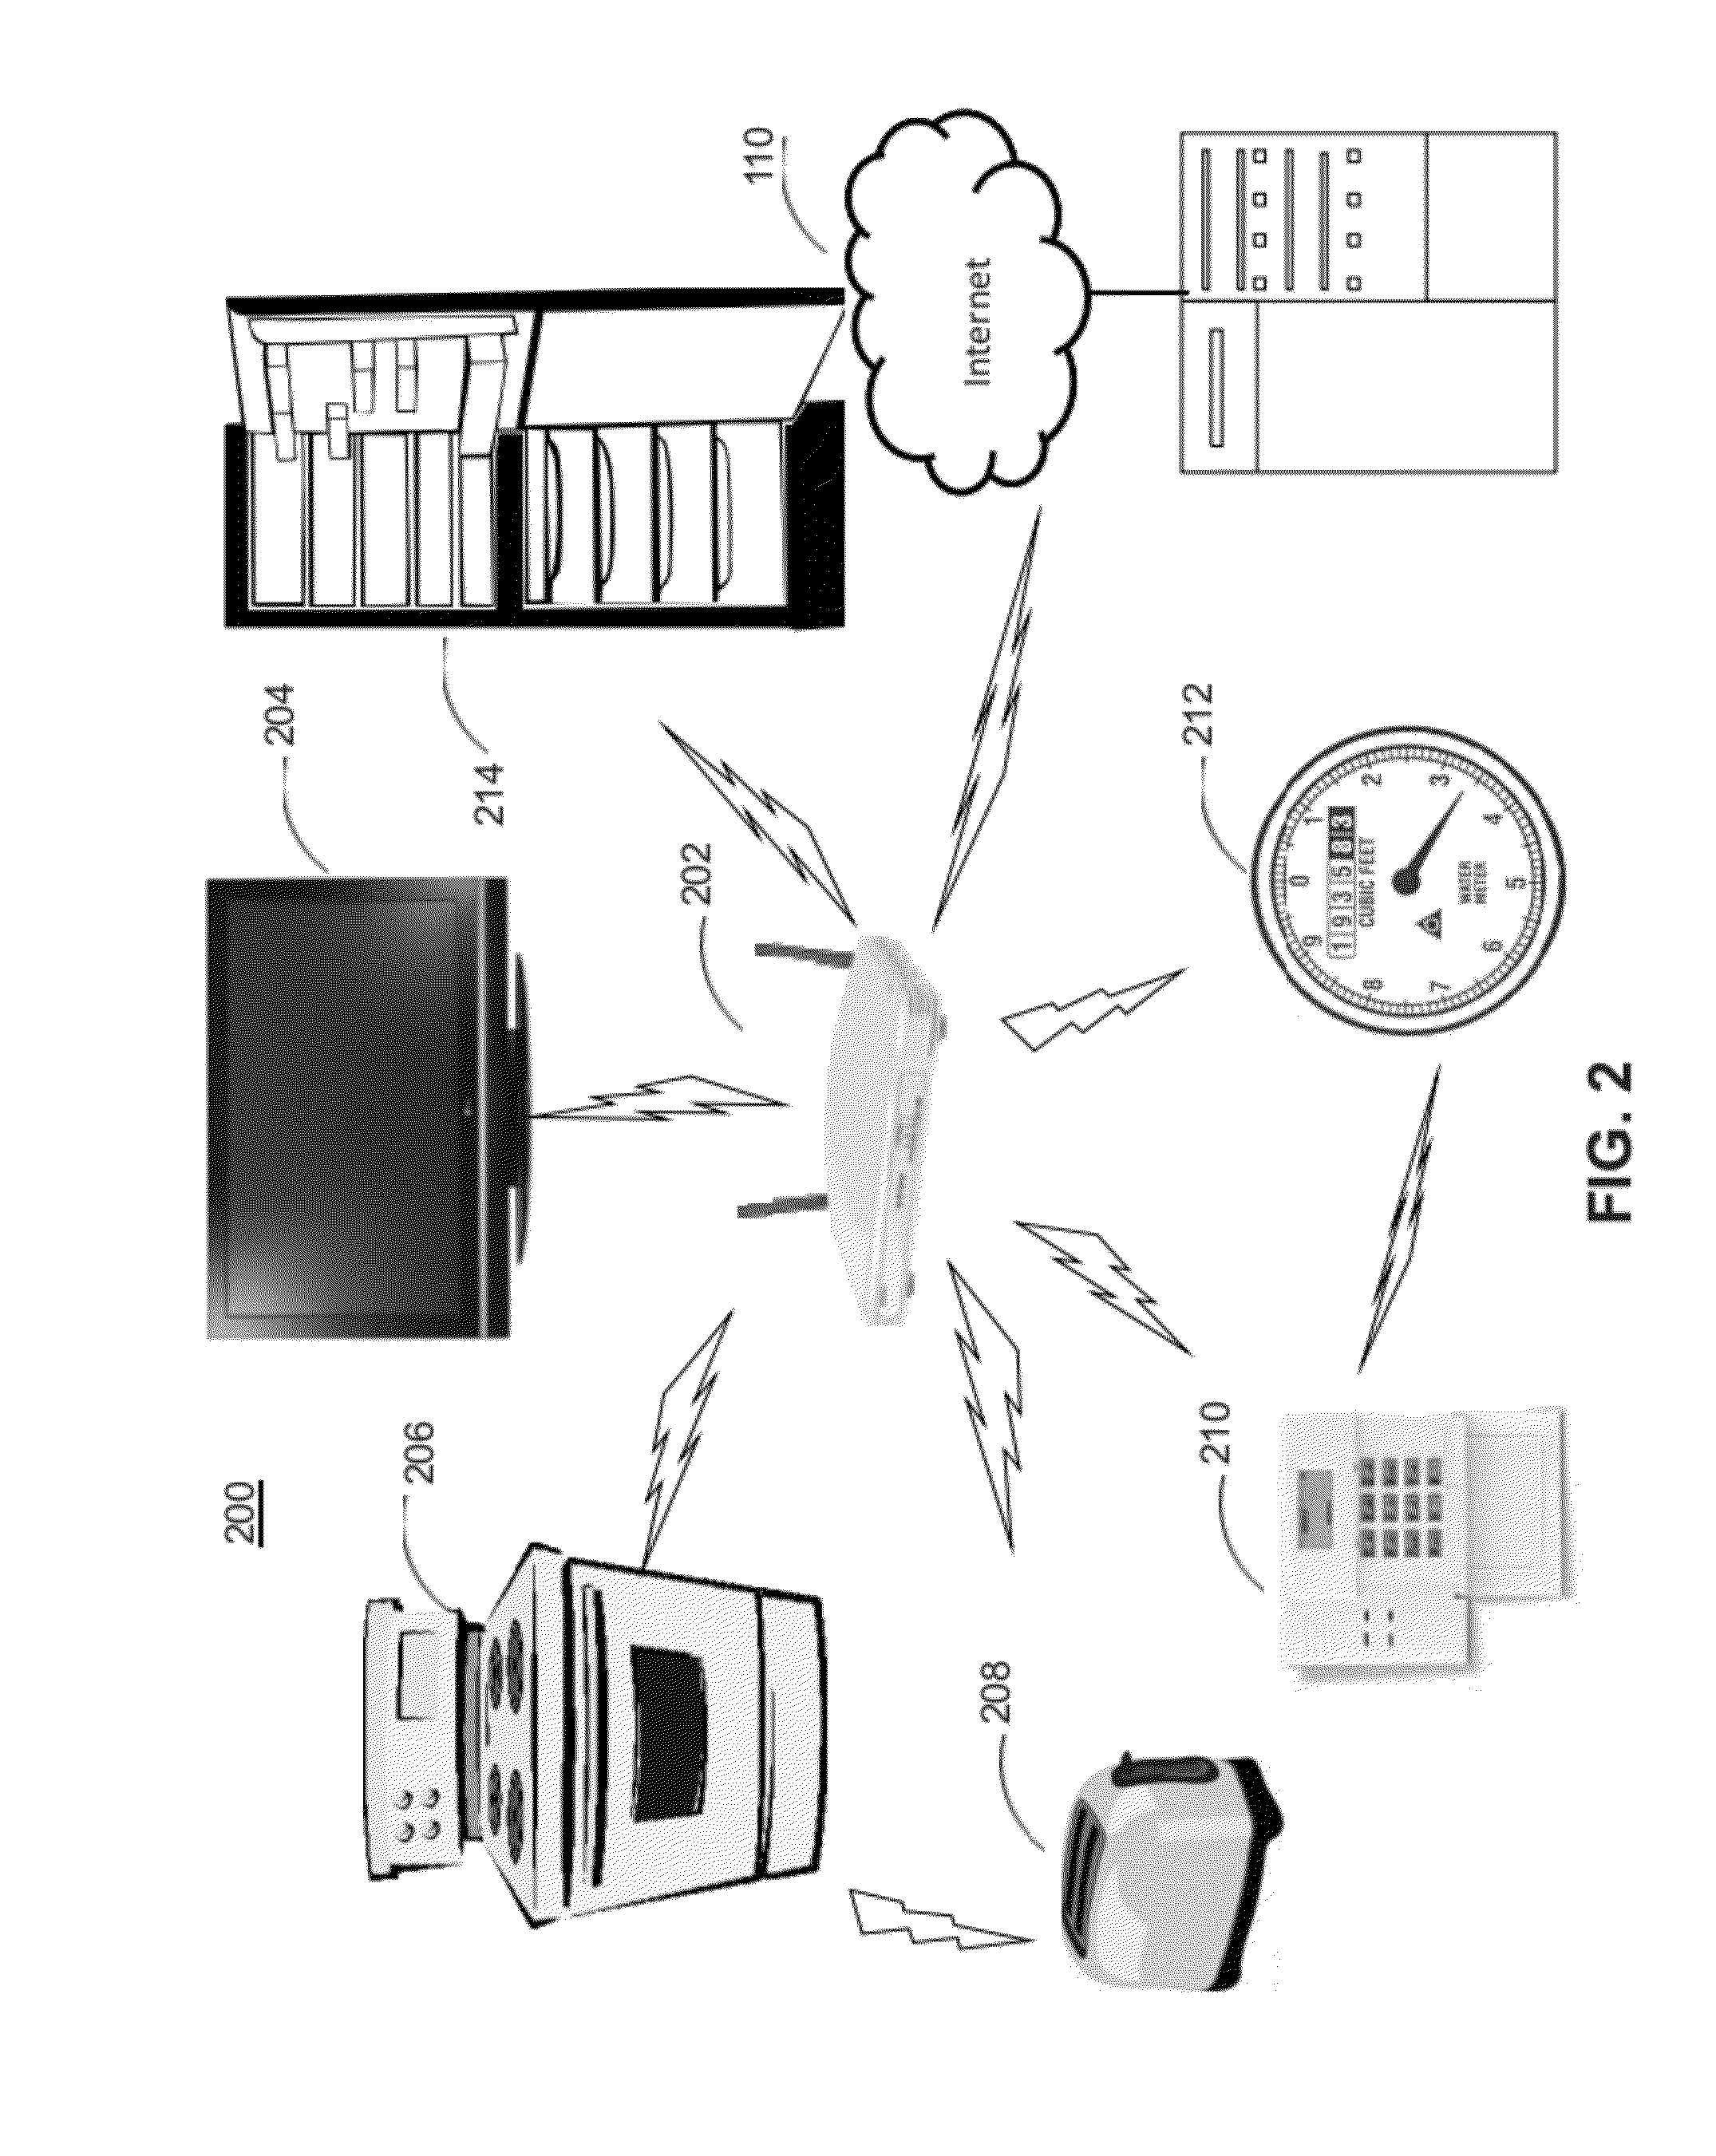 System and method for active insurance underwriting using intelligent ip-addressable devices